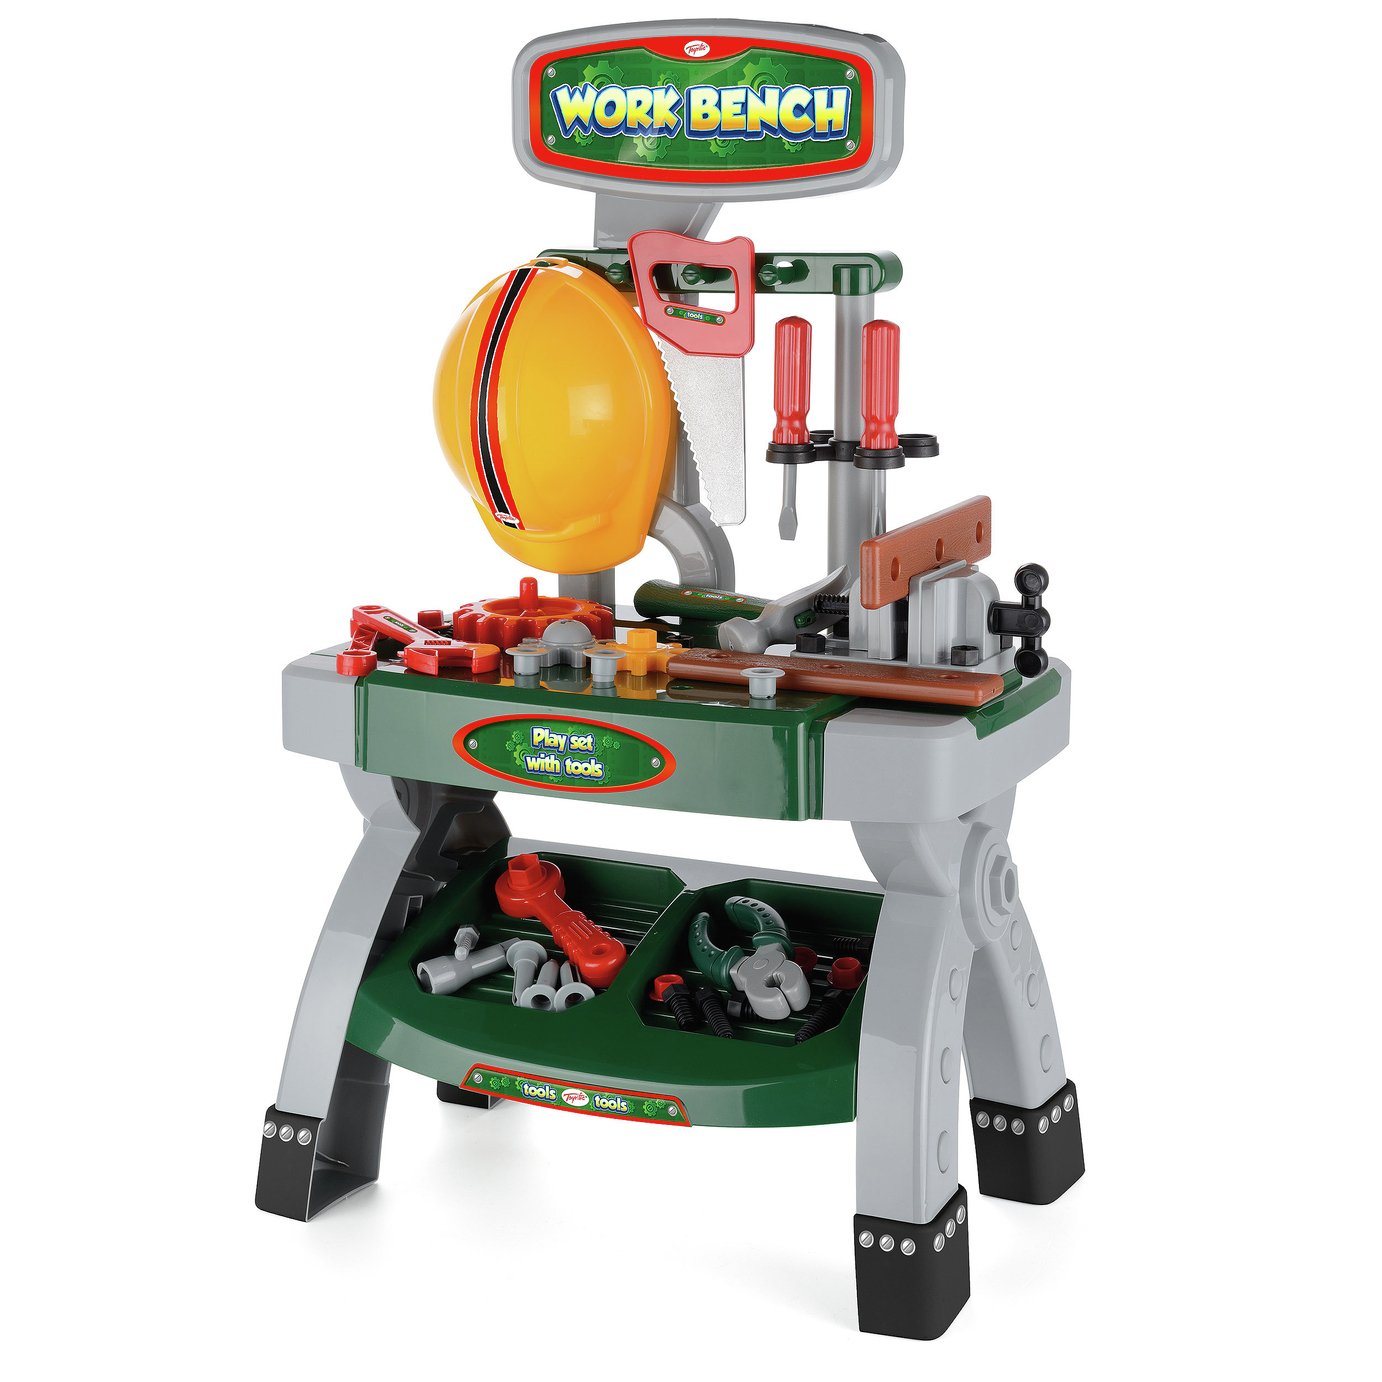 Work Bench with Tools Toy Review